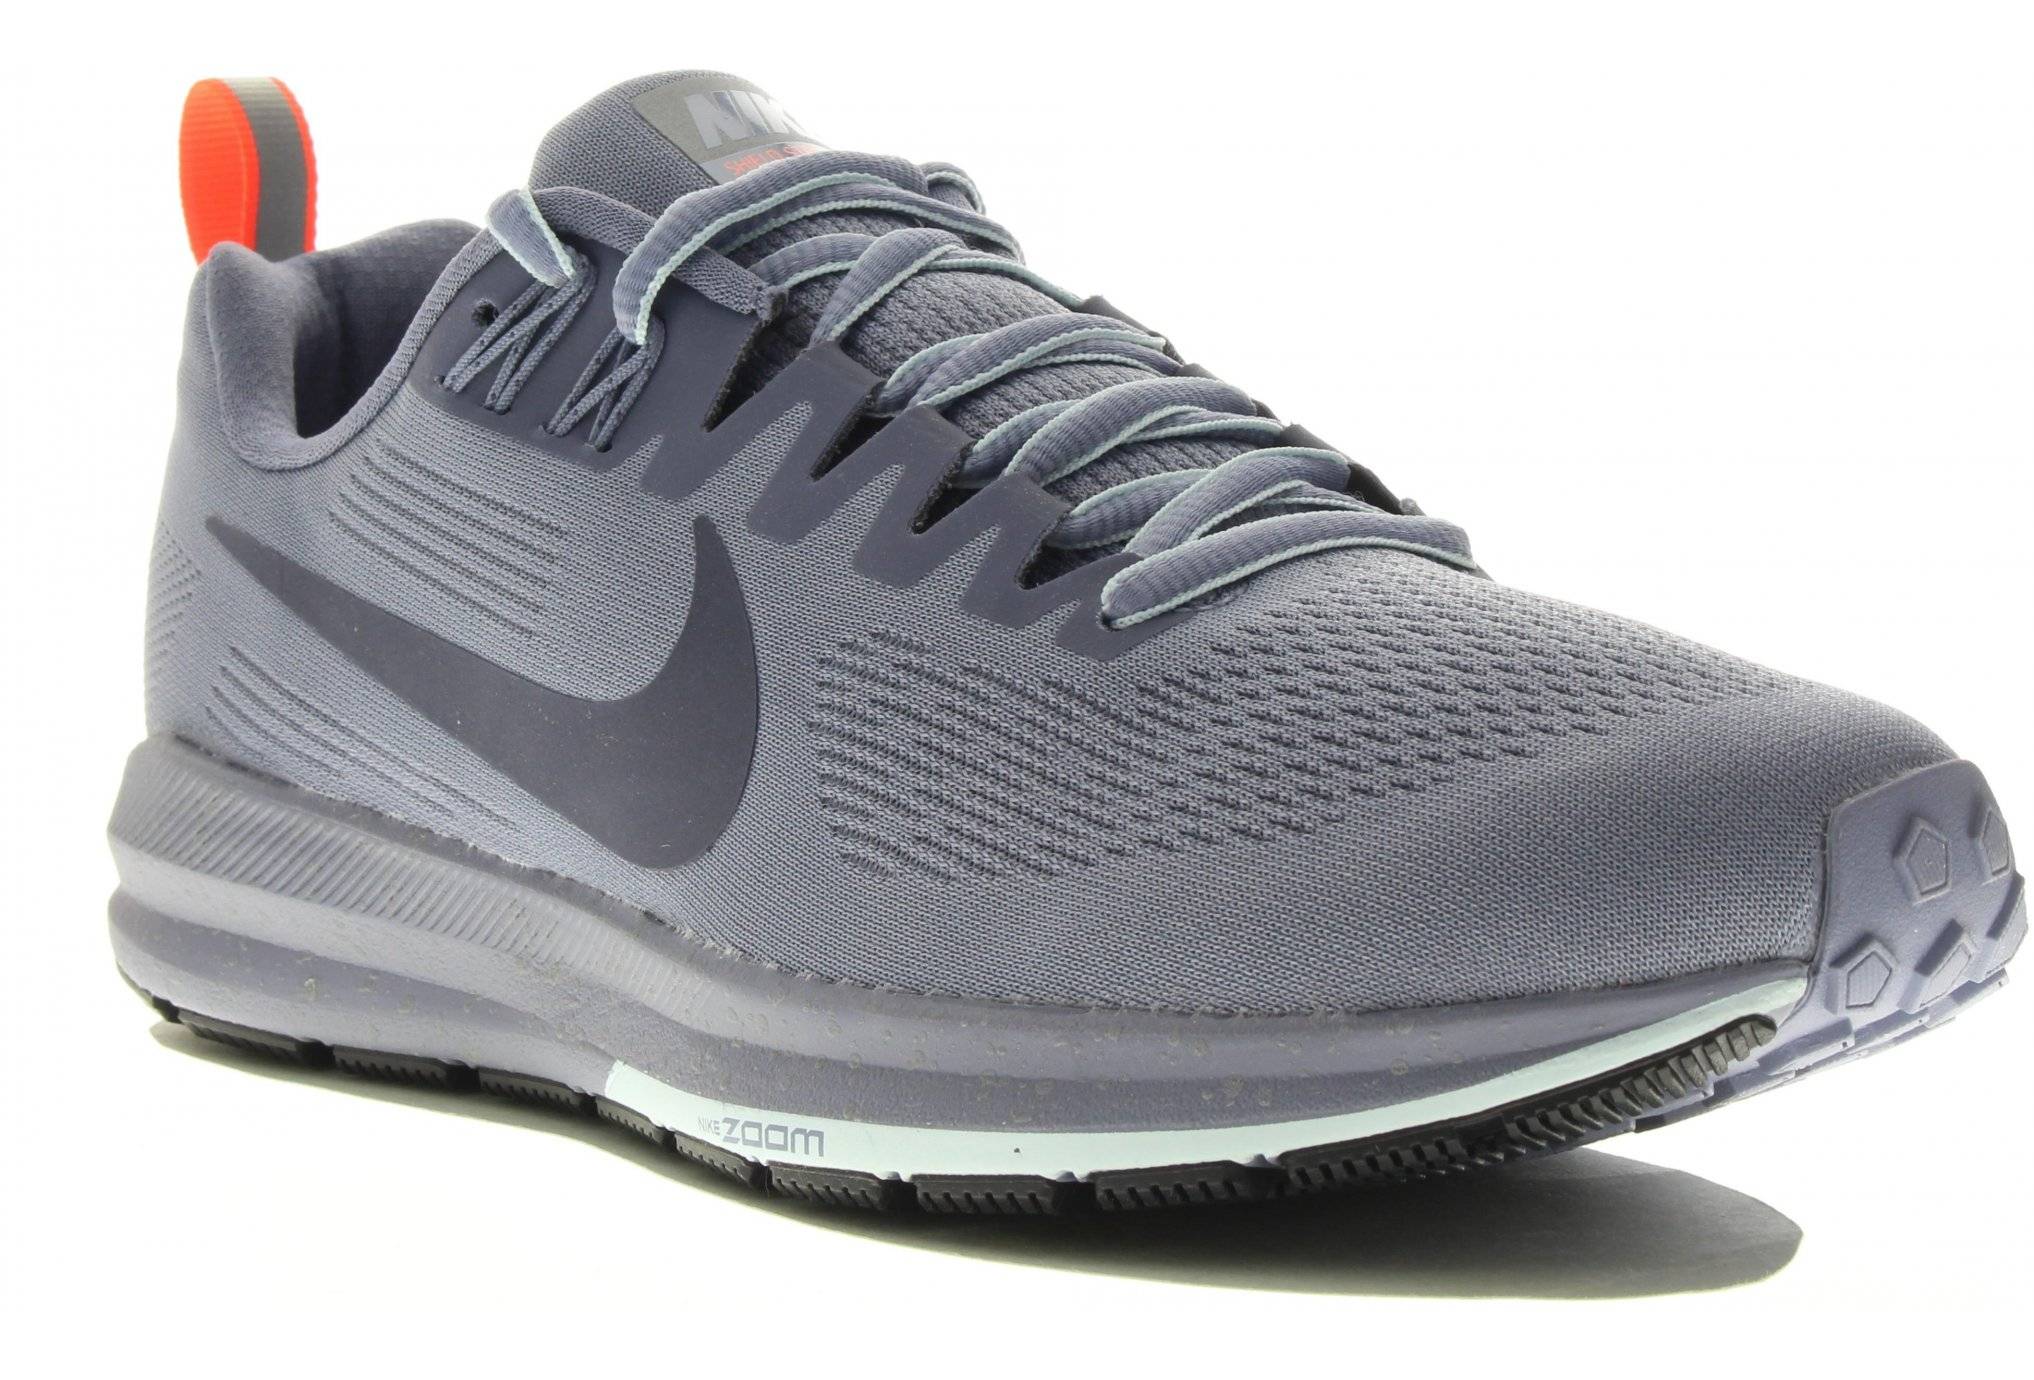 Nike Air Zoom Structure 21 Shield W 